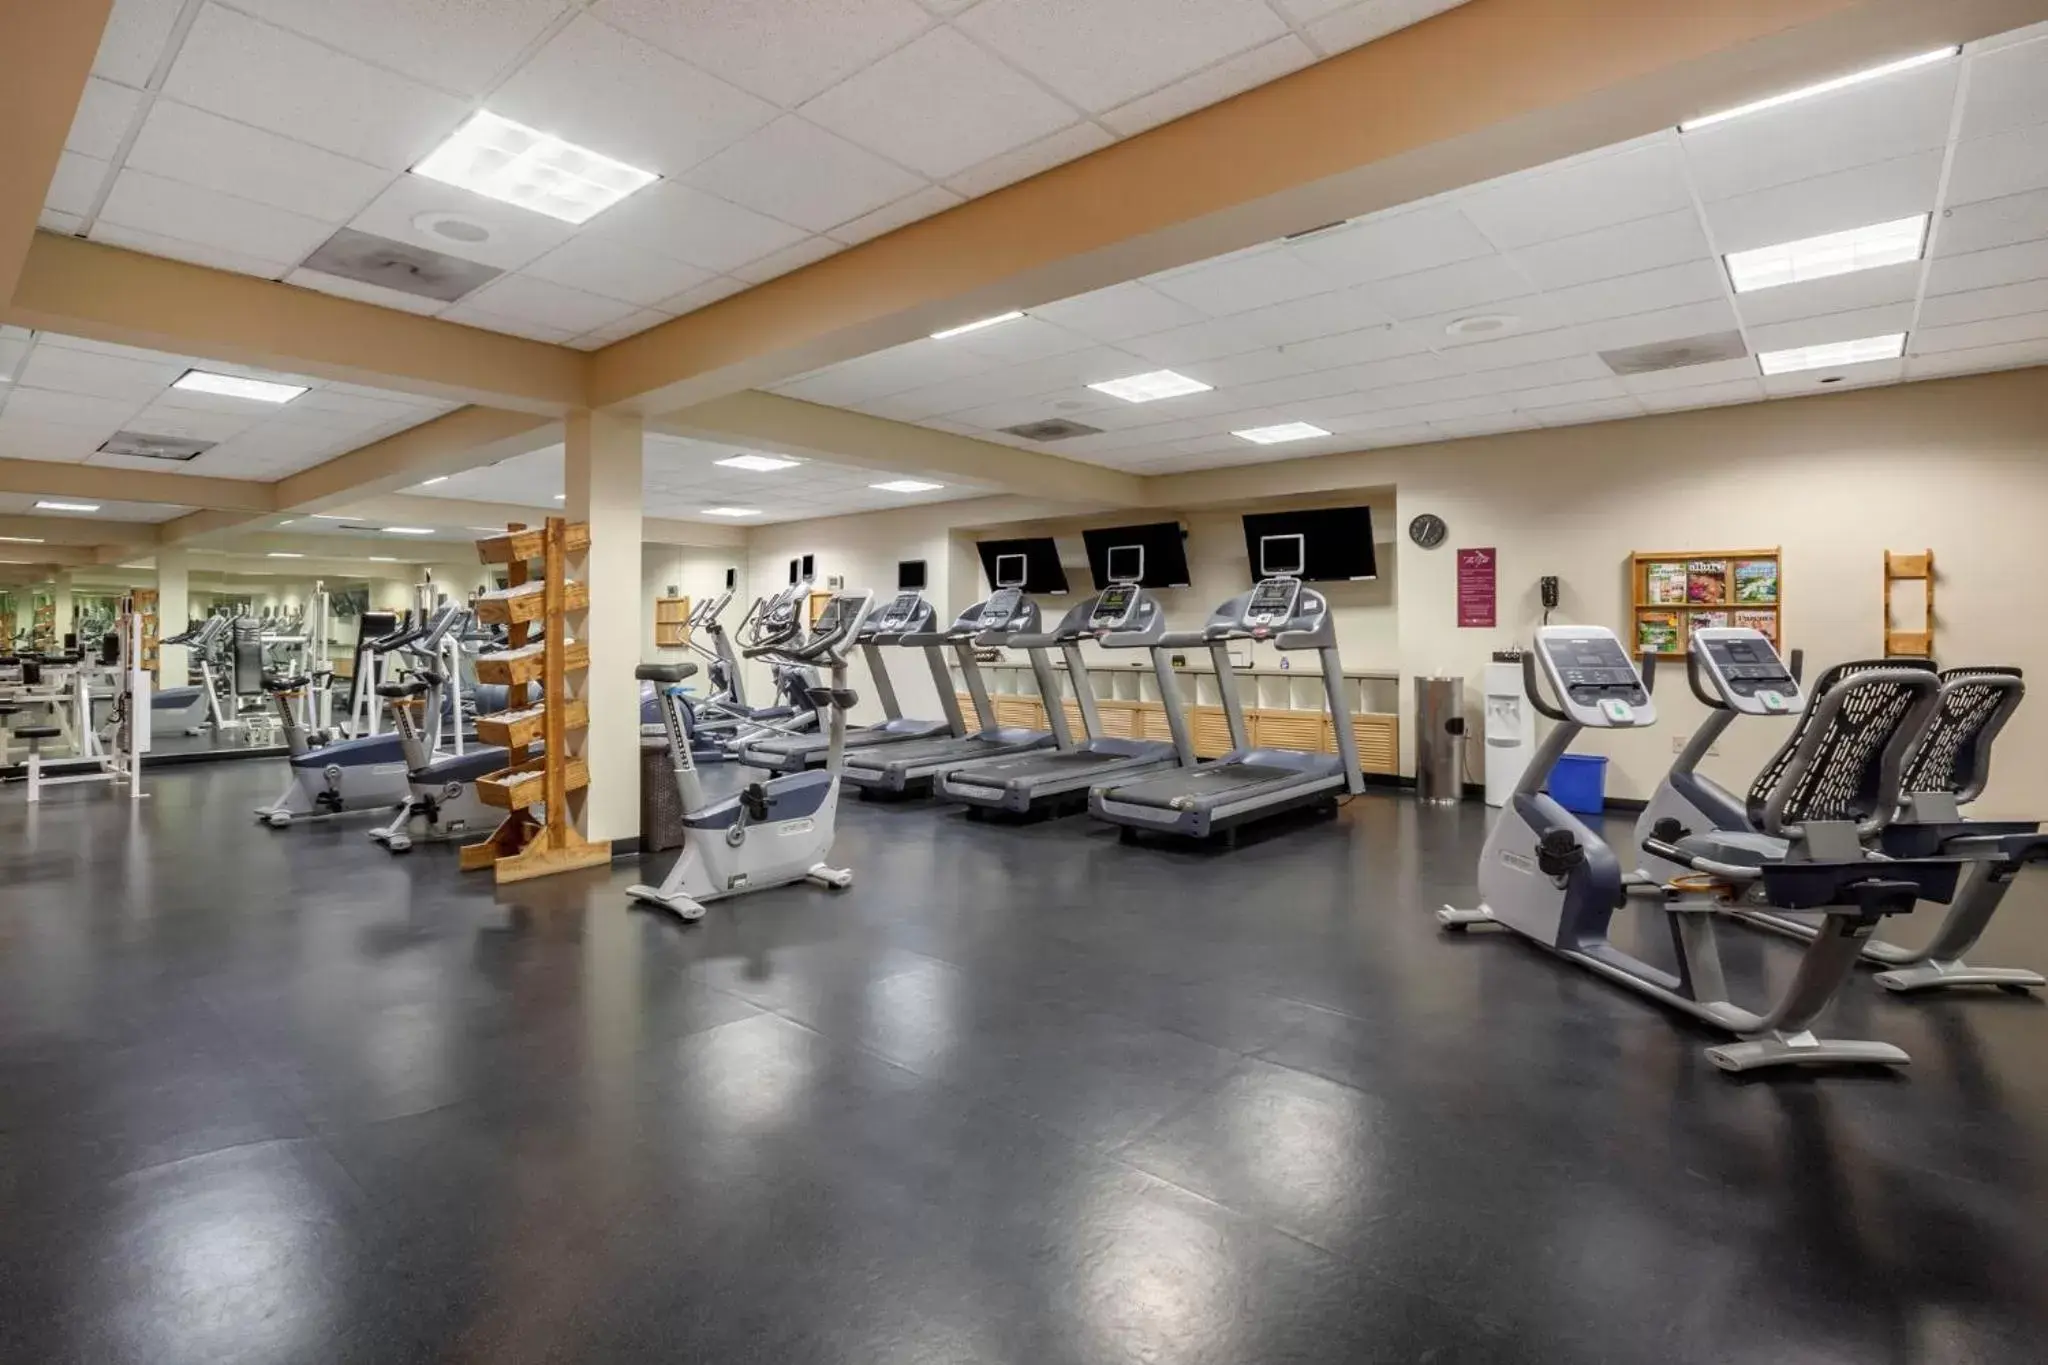 Fitness centre/facilities, Fitness Center/Facilities in Omni Tucson National Resort